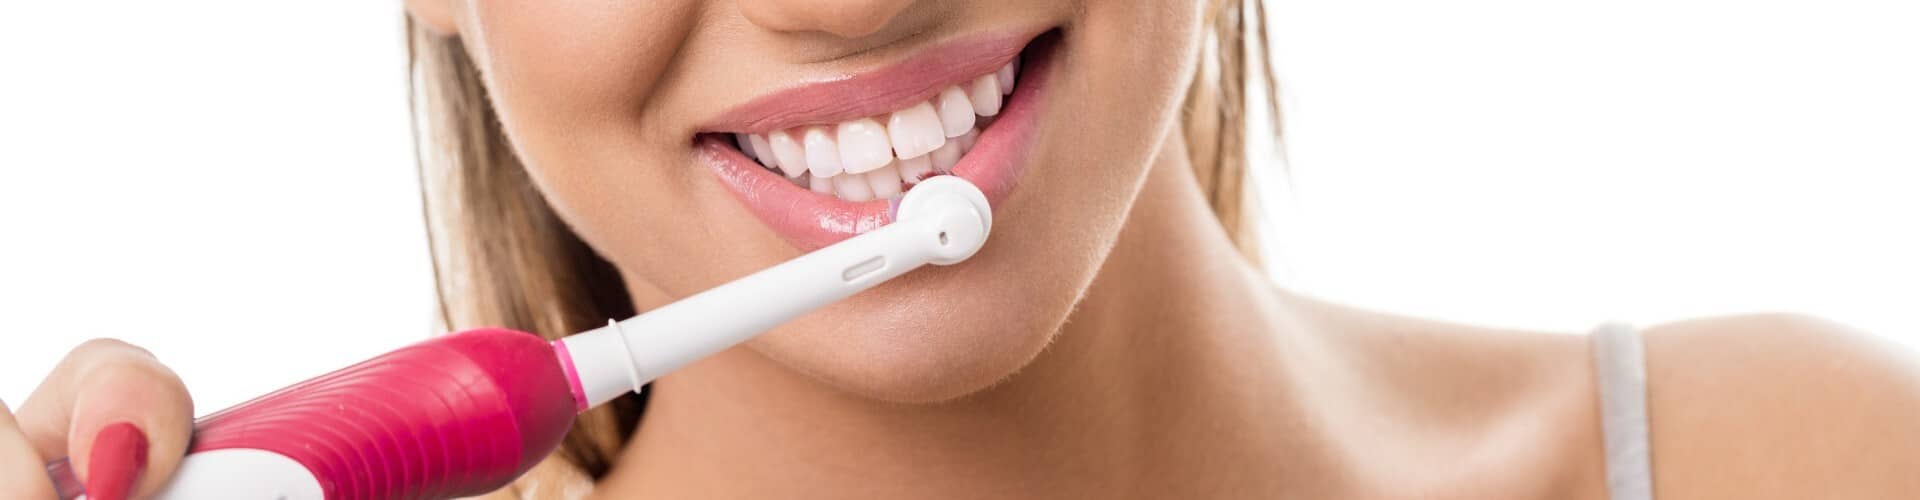 7 Best Electric Toothbrushes for Receding Gums Reviews (Feb. 2021)